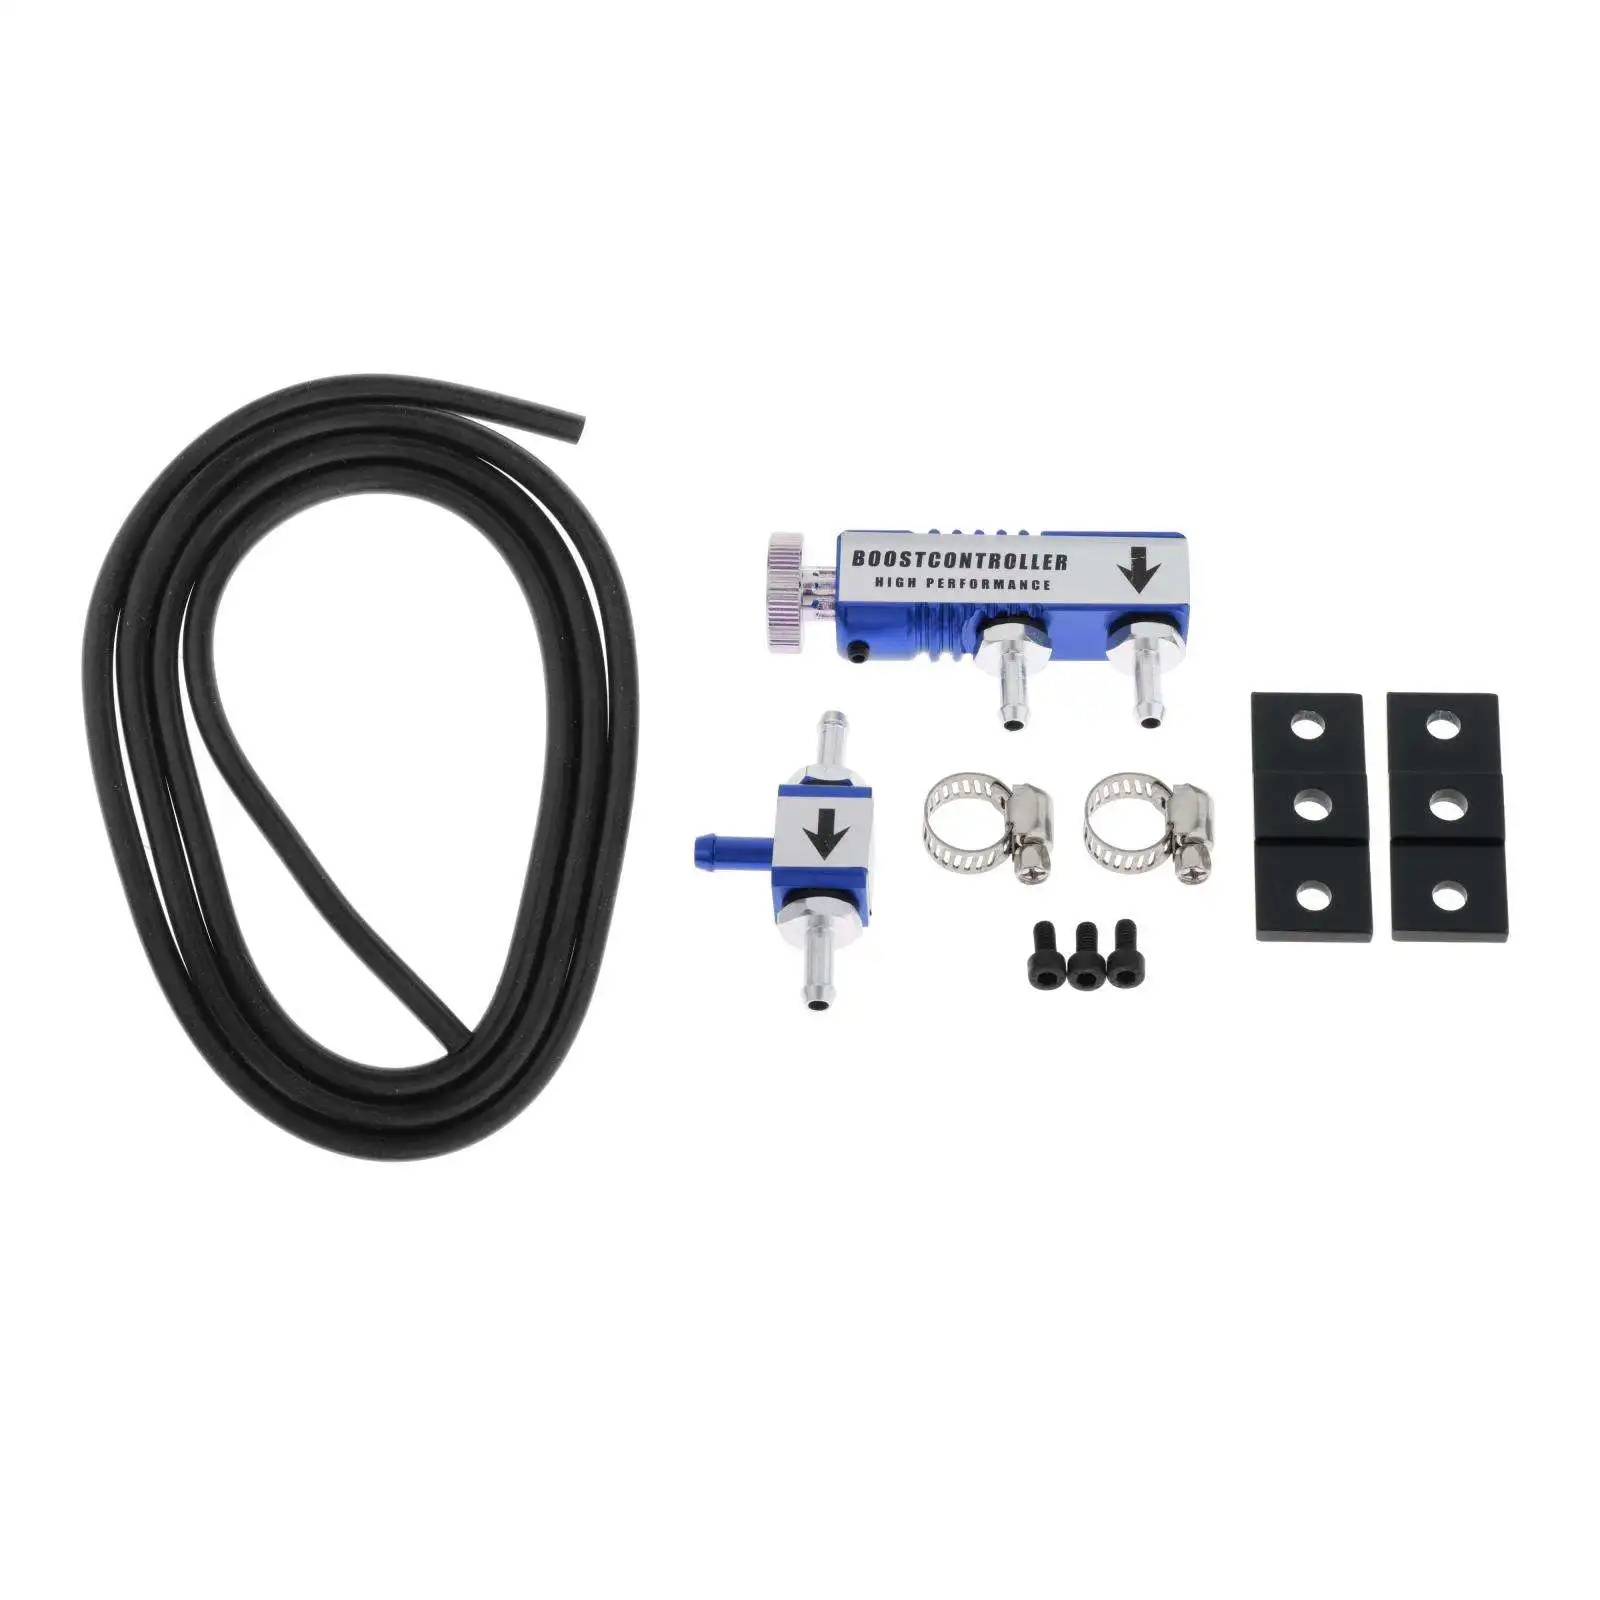 Turbo Boost Controller Set Boost Bleed Valve Fit Any Car Models (Only Fit Any Vehicles with Turbo Kit)